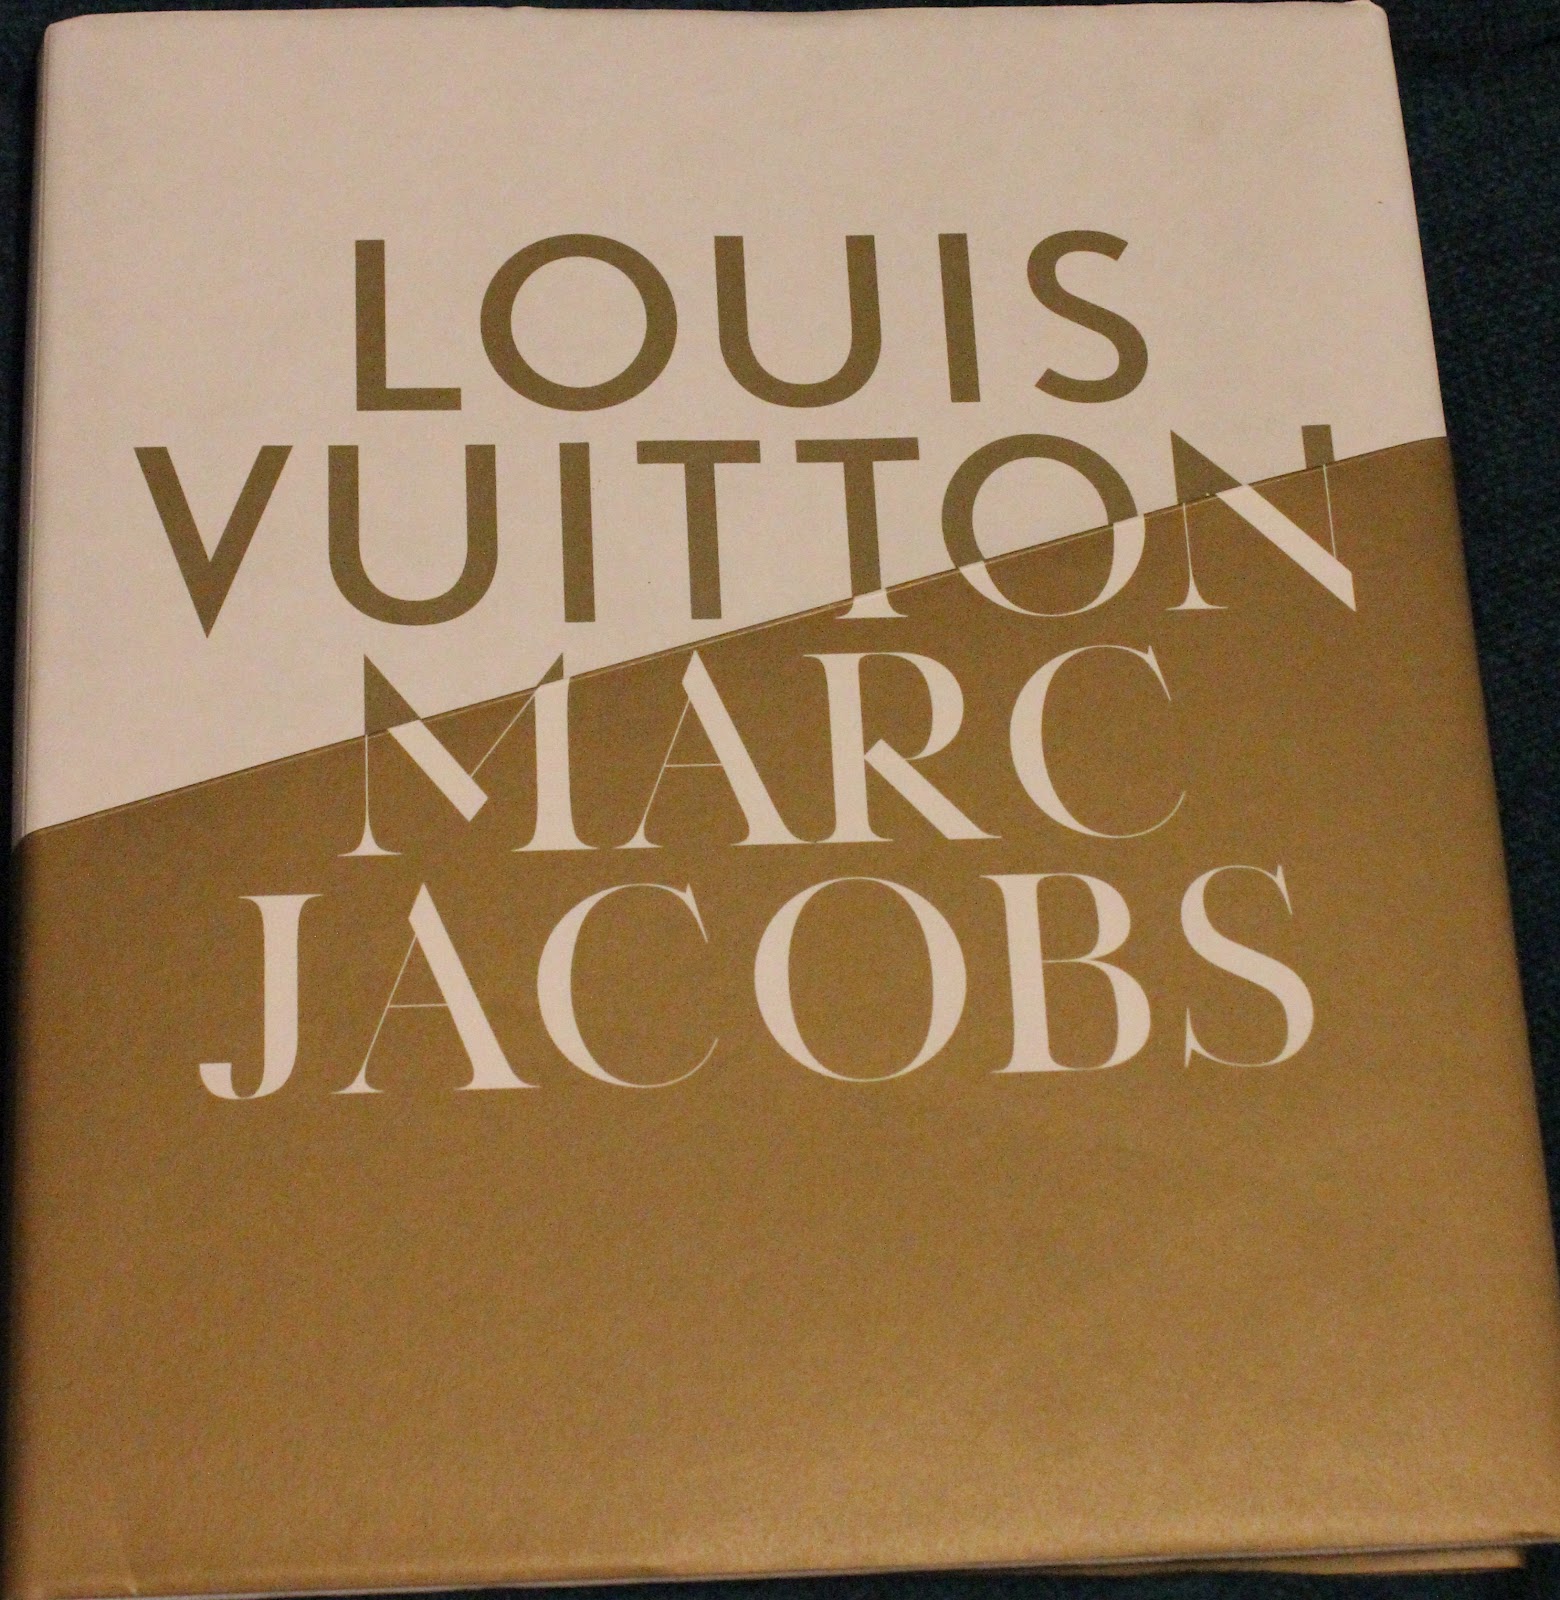 Niamh-makes-things: Louis Vuitton Marc Jacobs